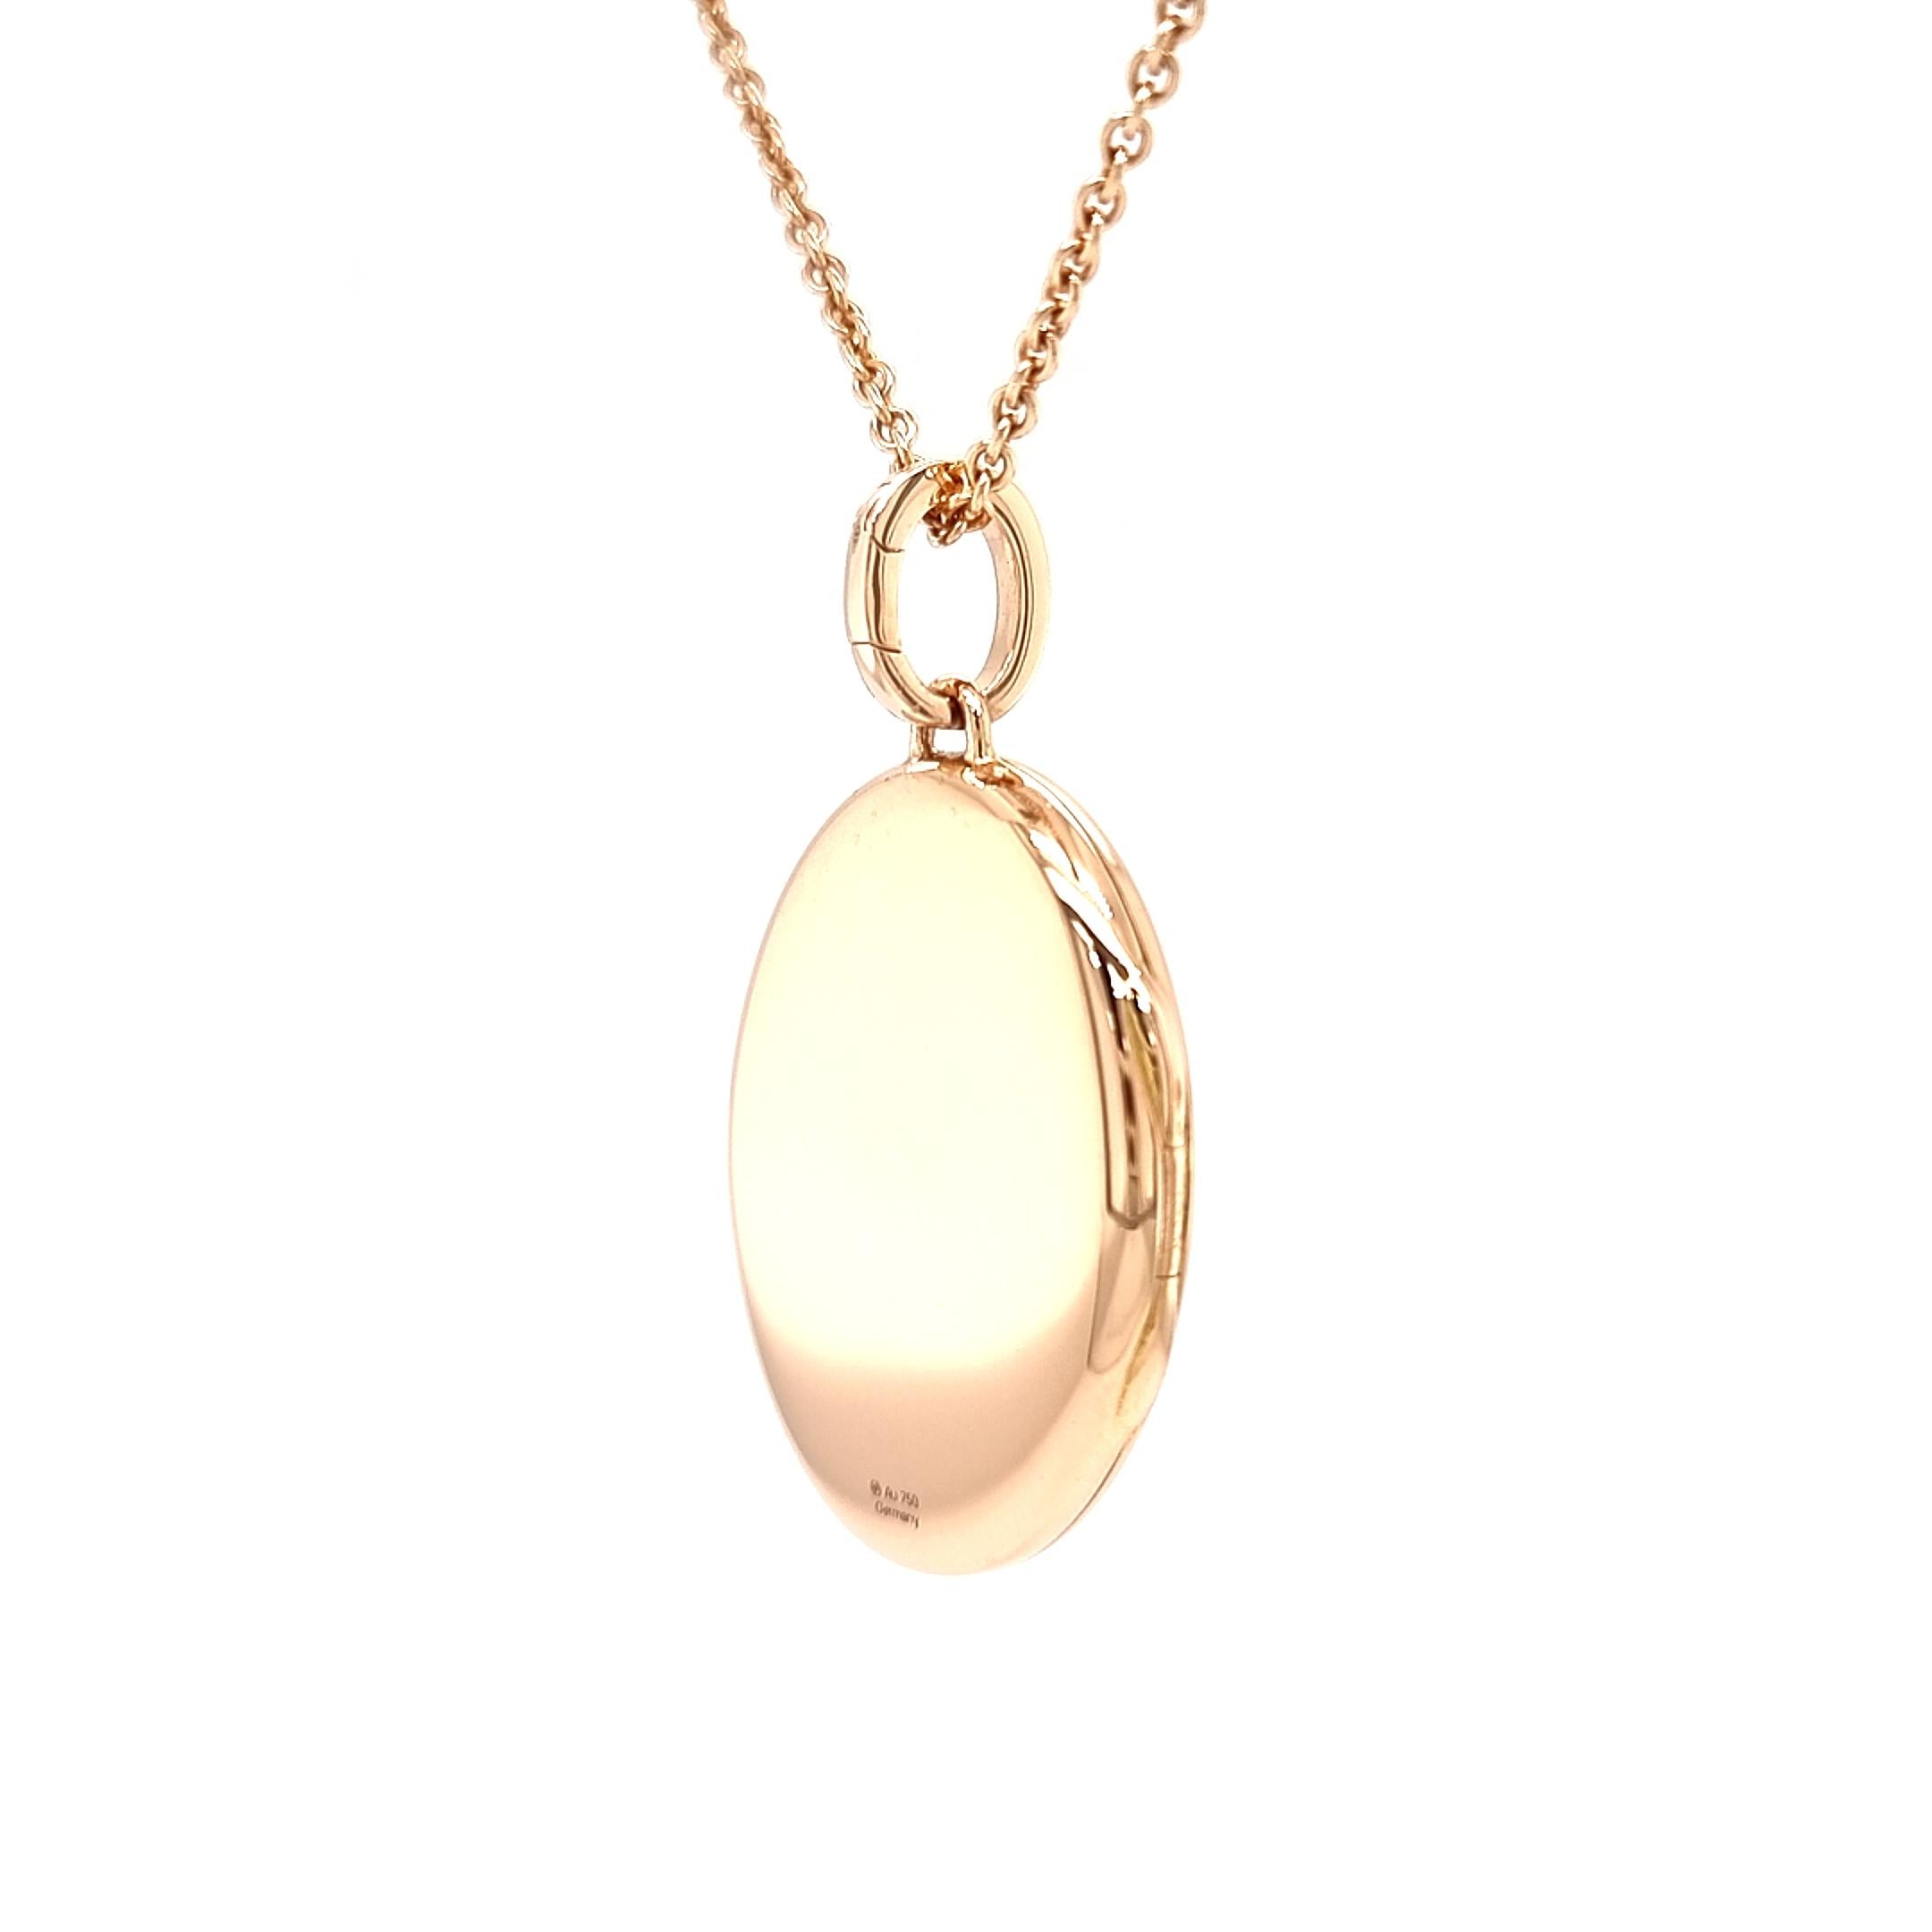 Customizable Oval Polished Pendant Locket - 18k Rose Gold - 23.0 mm x 32.0 mm For Sale 1